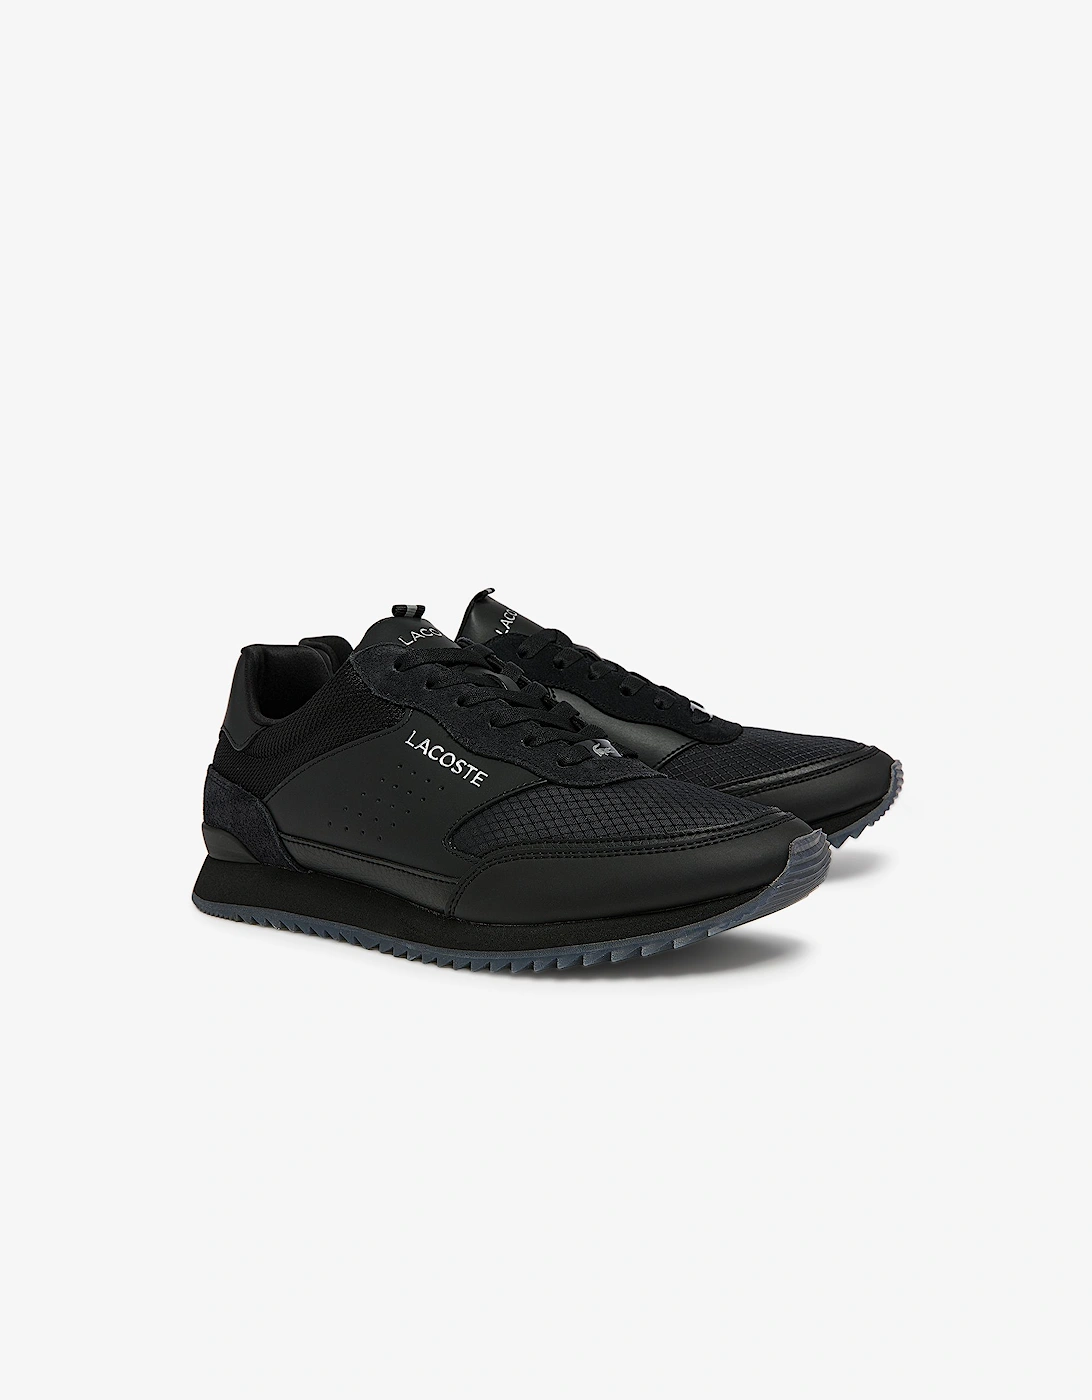 Mens Patner Luxe Shoes